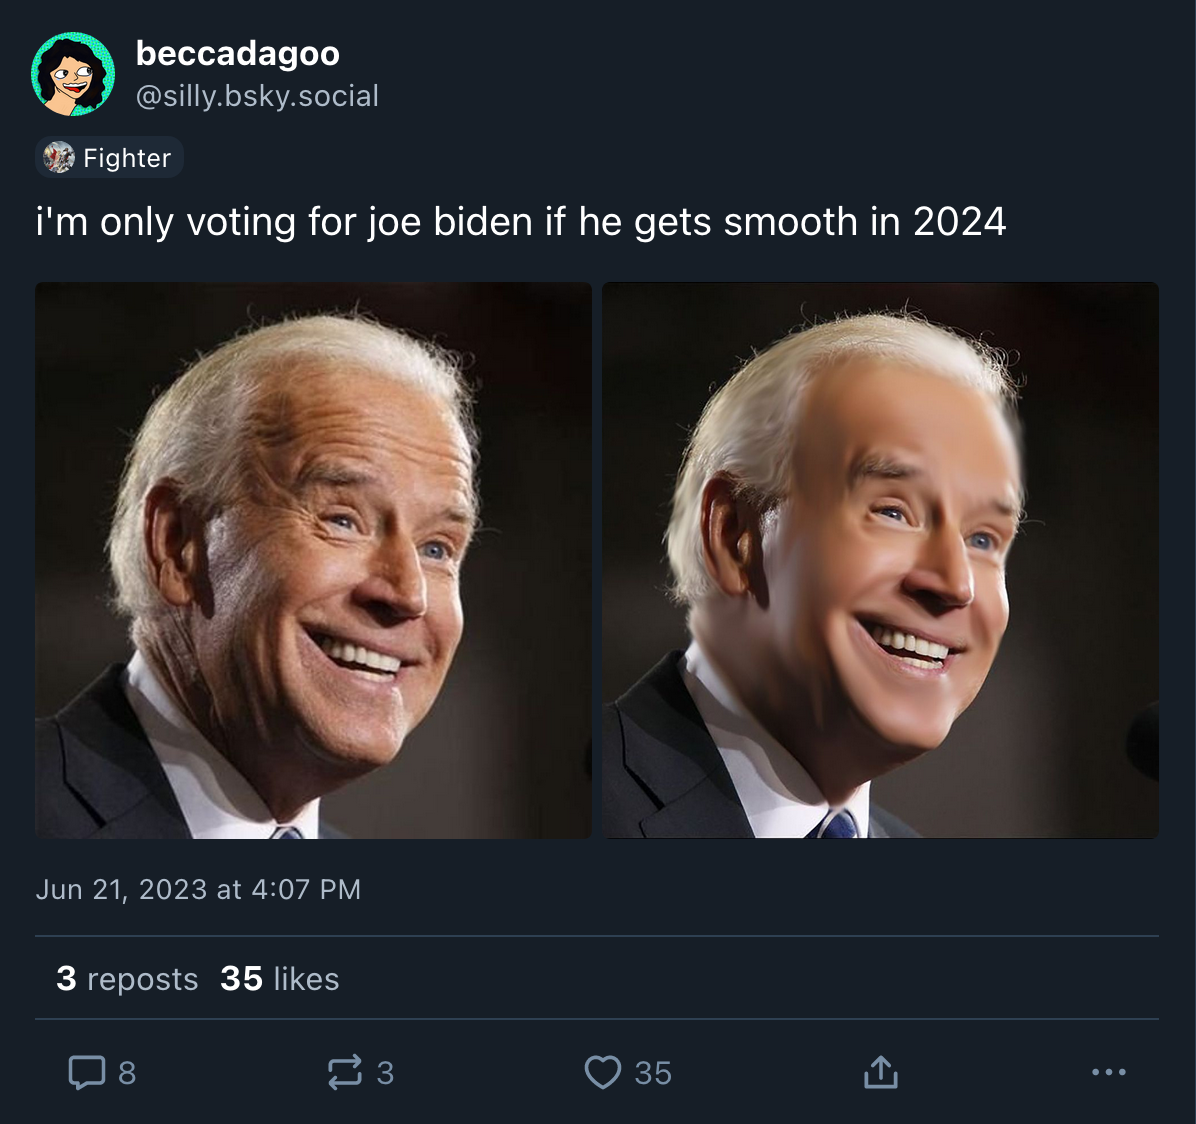 beccadagoo @silly.bsky.social: i'm only voting for joe biden if he gets smooth in 2024 [Picture of Joe Biden][Picture of Joe Biden with wrinkles, folds, and pores removed]